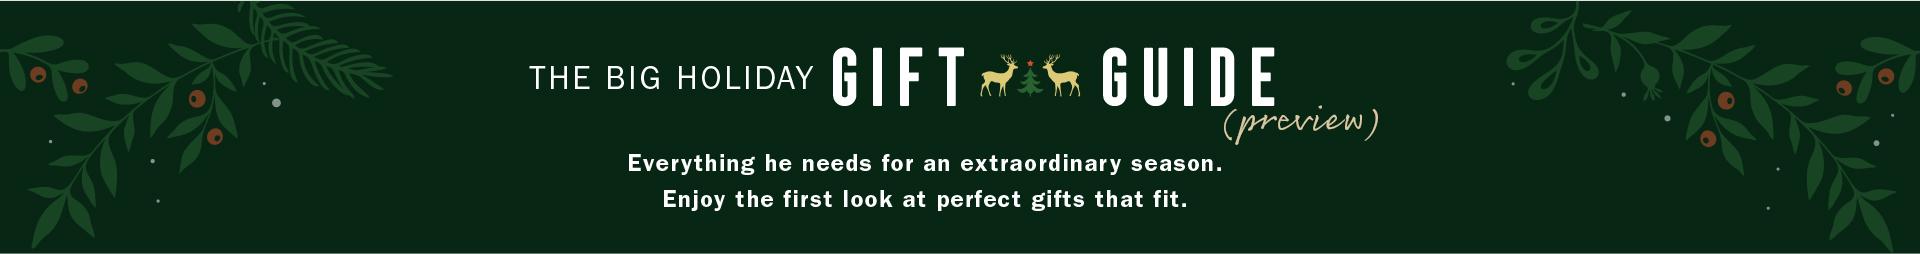 THE BIG HOLIDAY GIFT GUIDE PREVIEW | Everything he needs for an extraordinary season. Enjoy the first look at perfect gifts that fit.